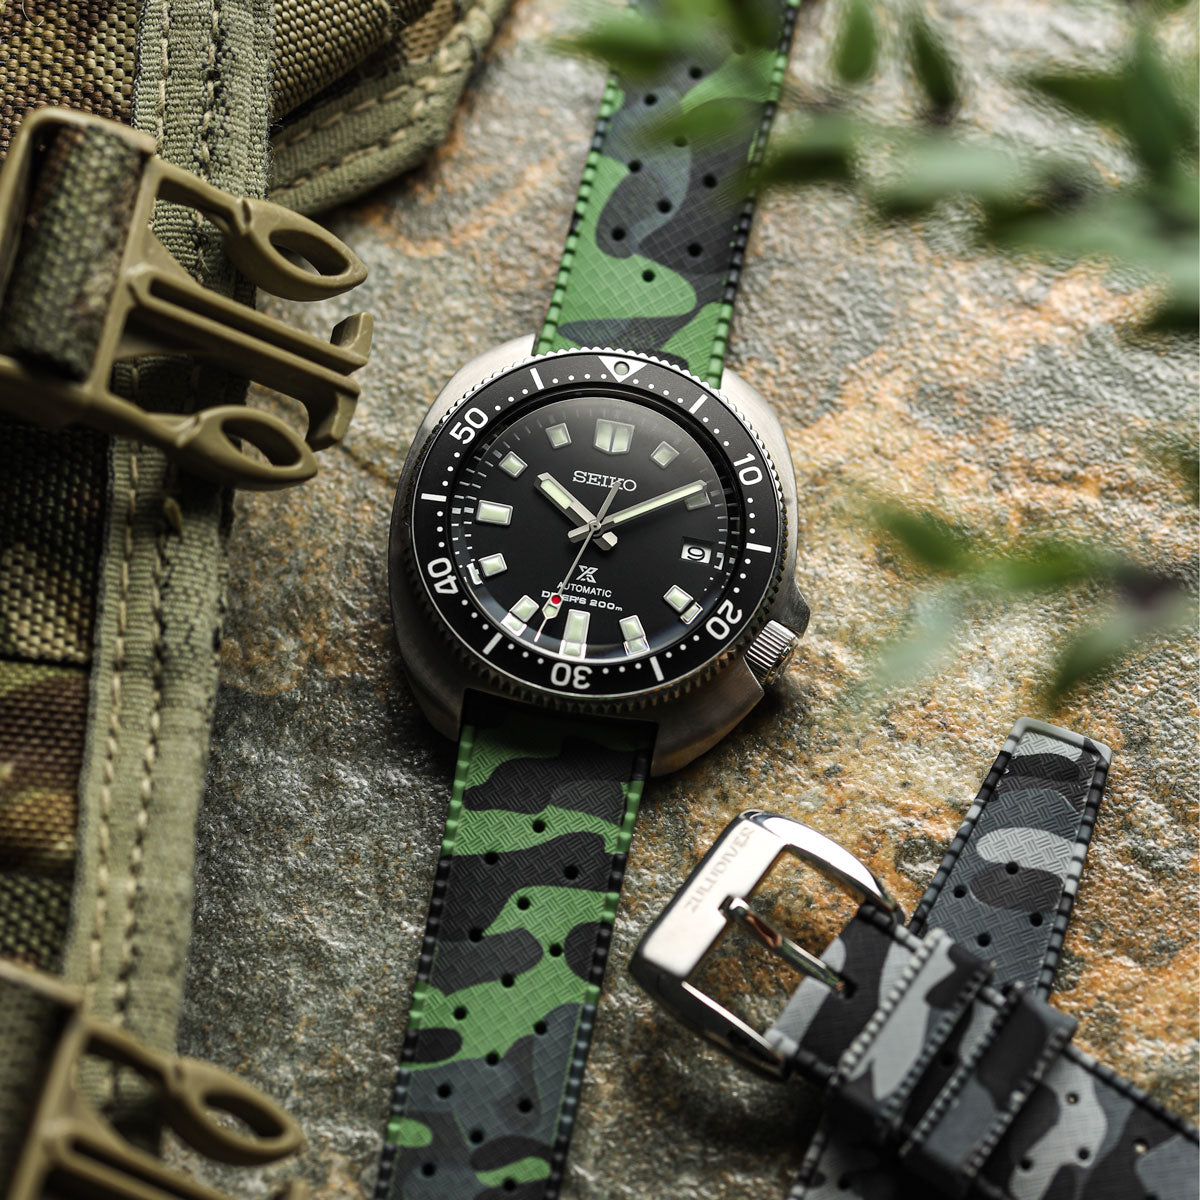 ZULUDIVER Tropical Style Camo Rubber Watch Strap - Brown - additional image 3